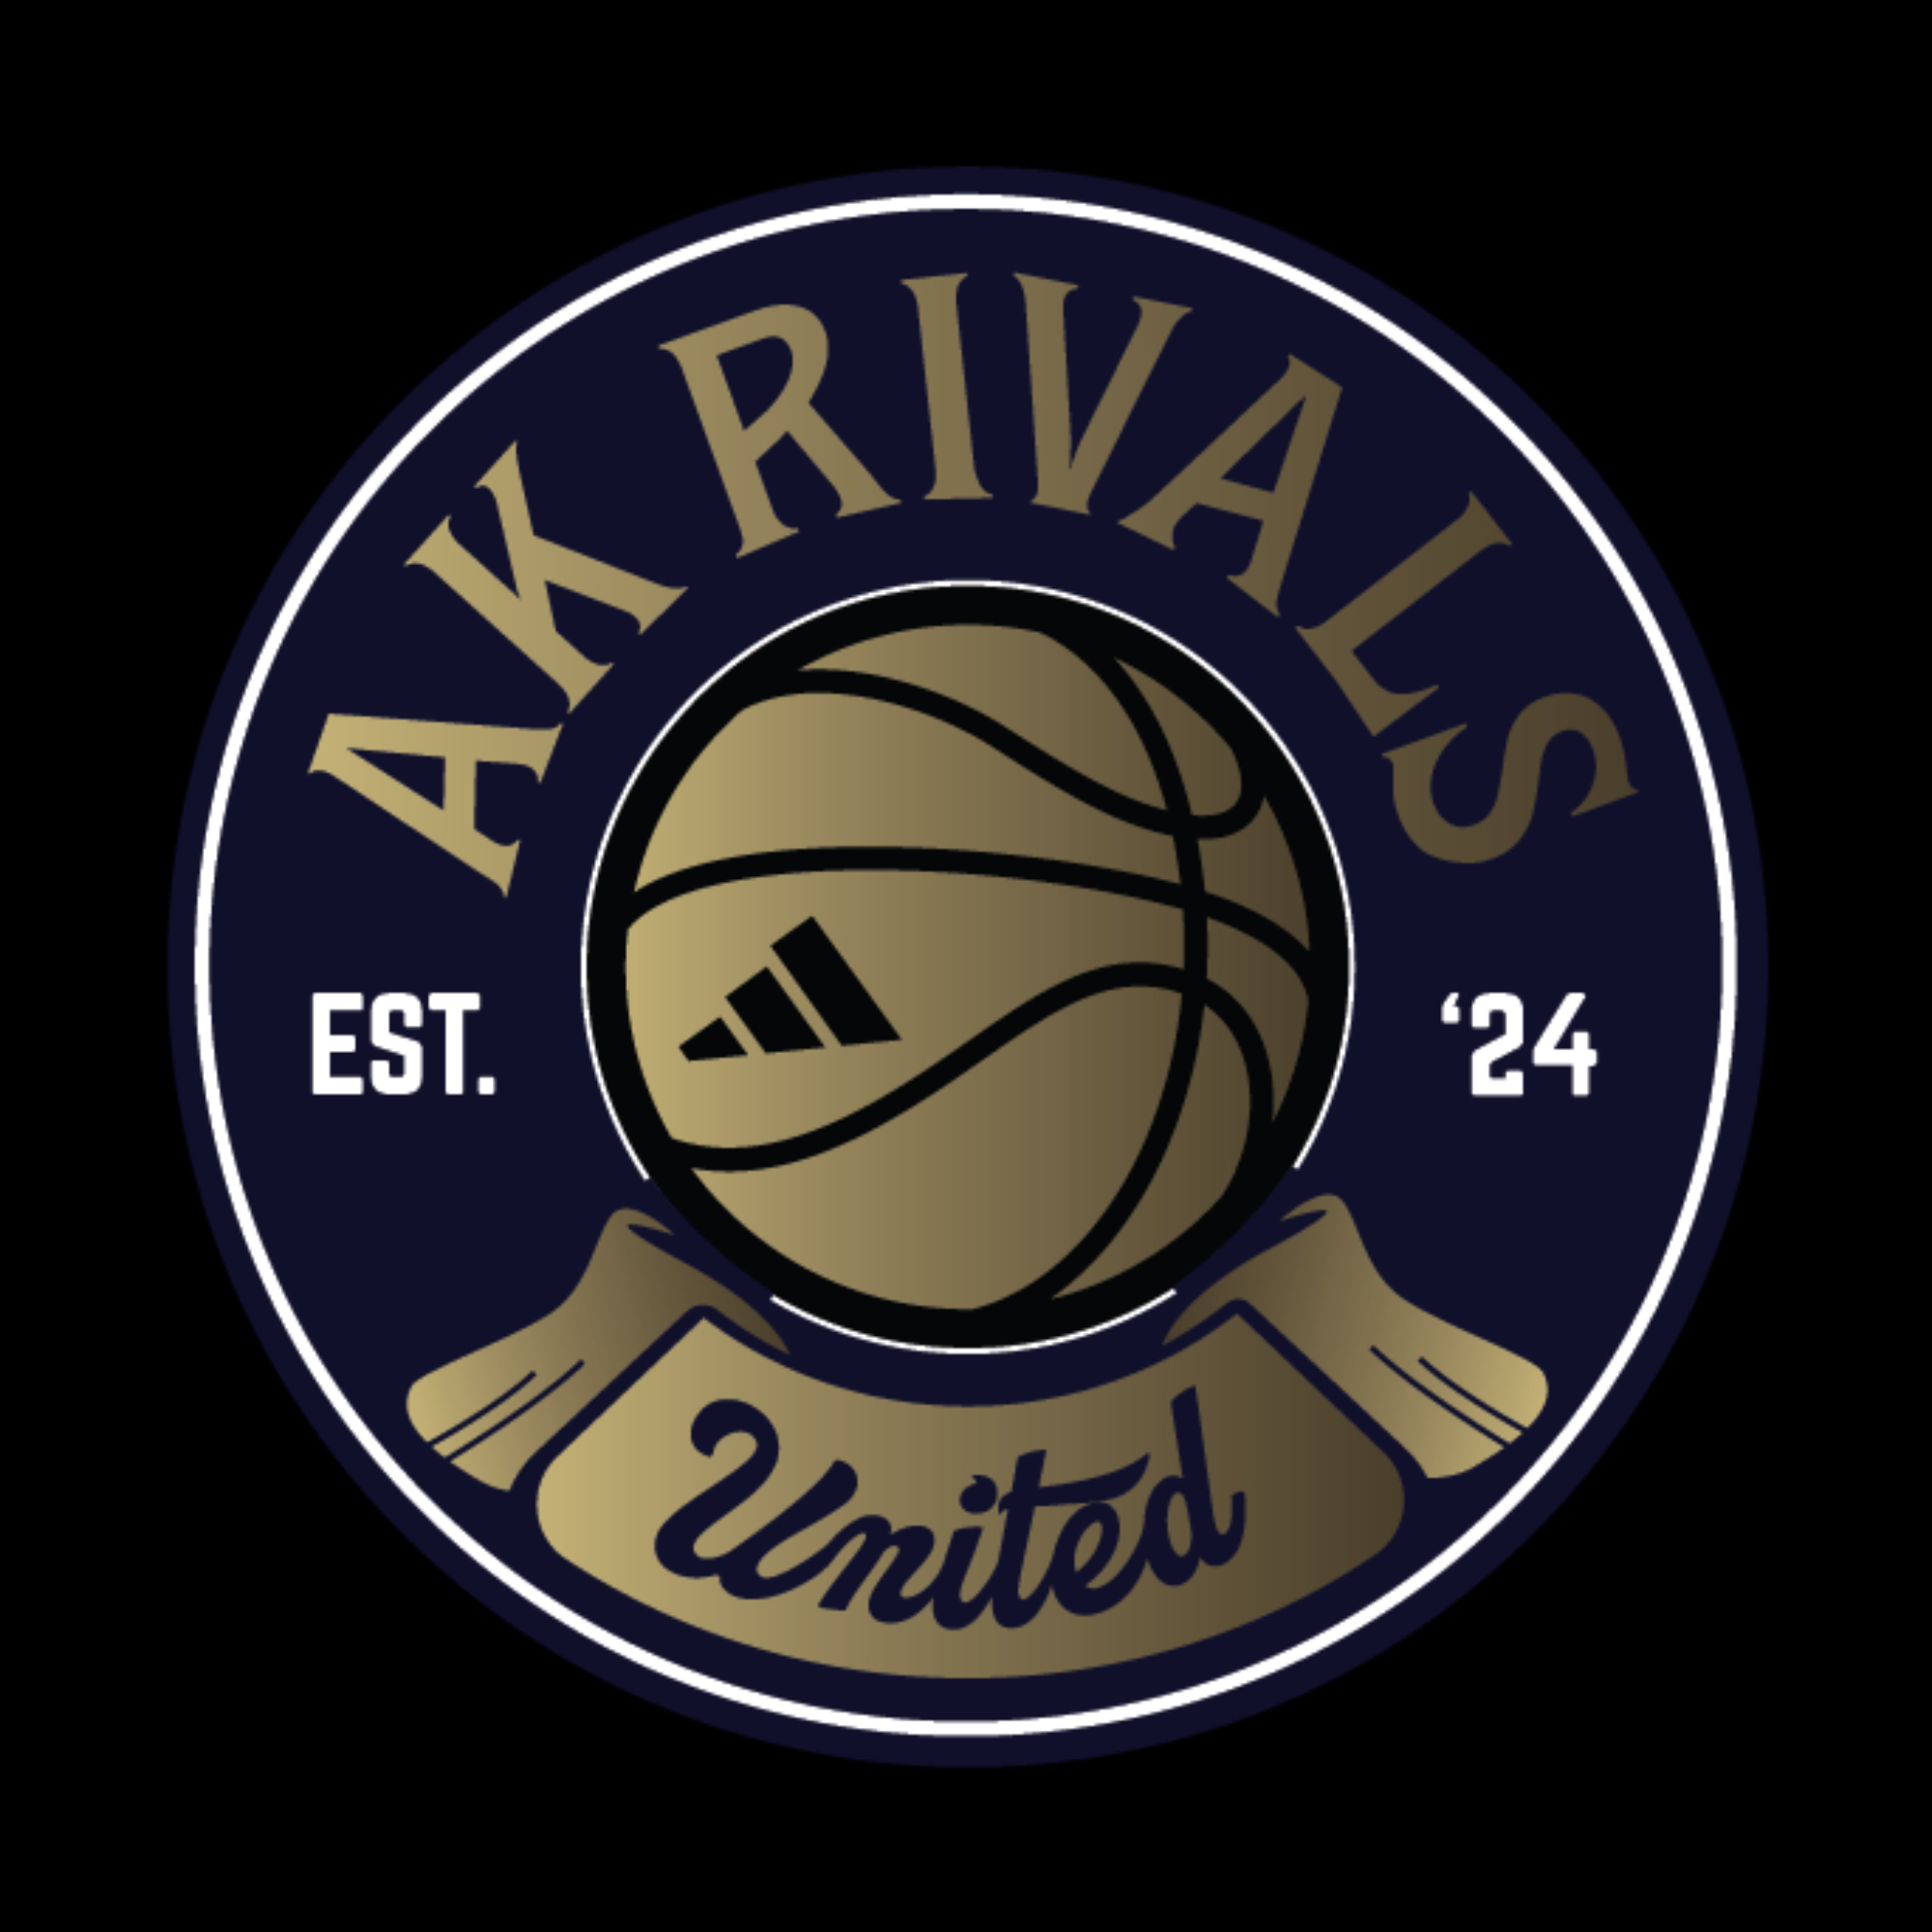 The official logo of AK Rivals United